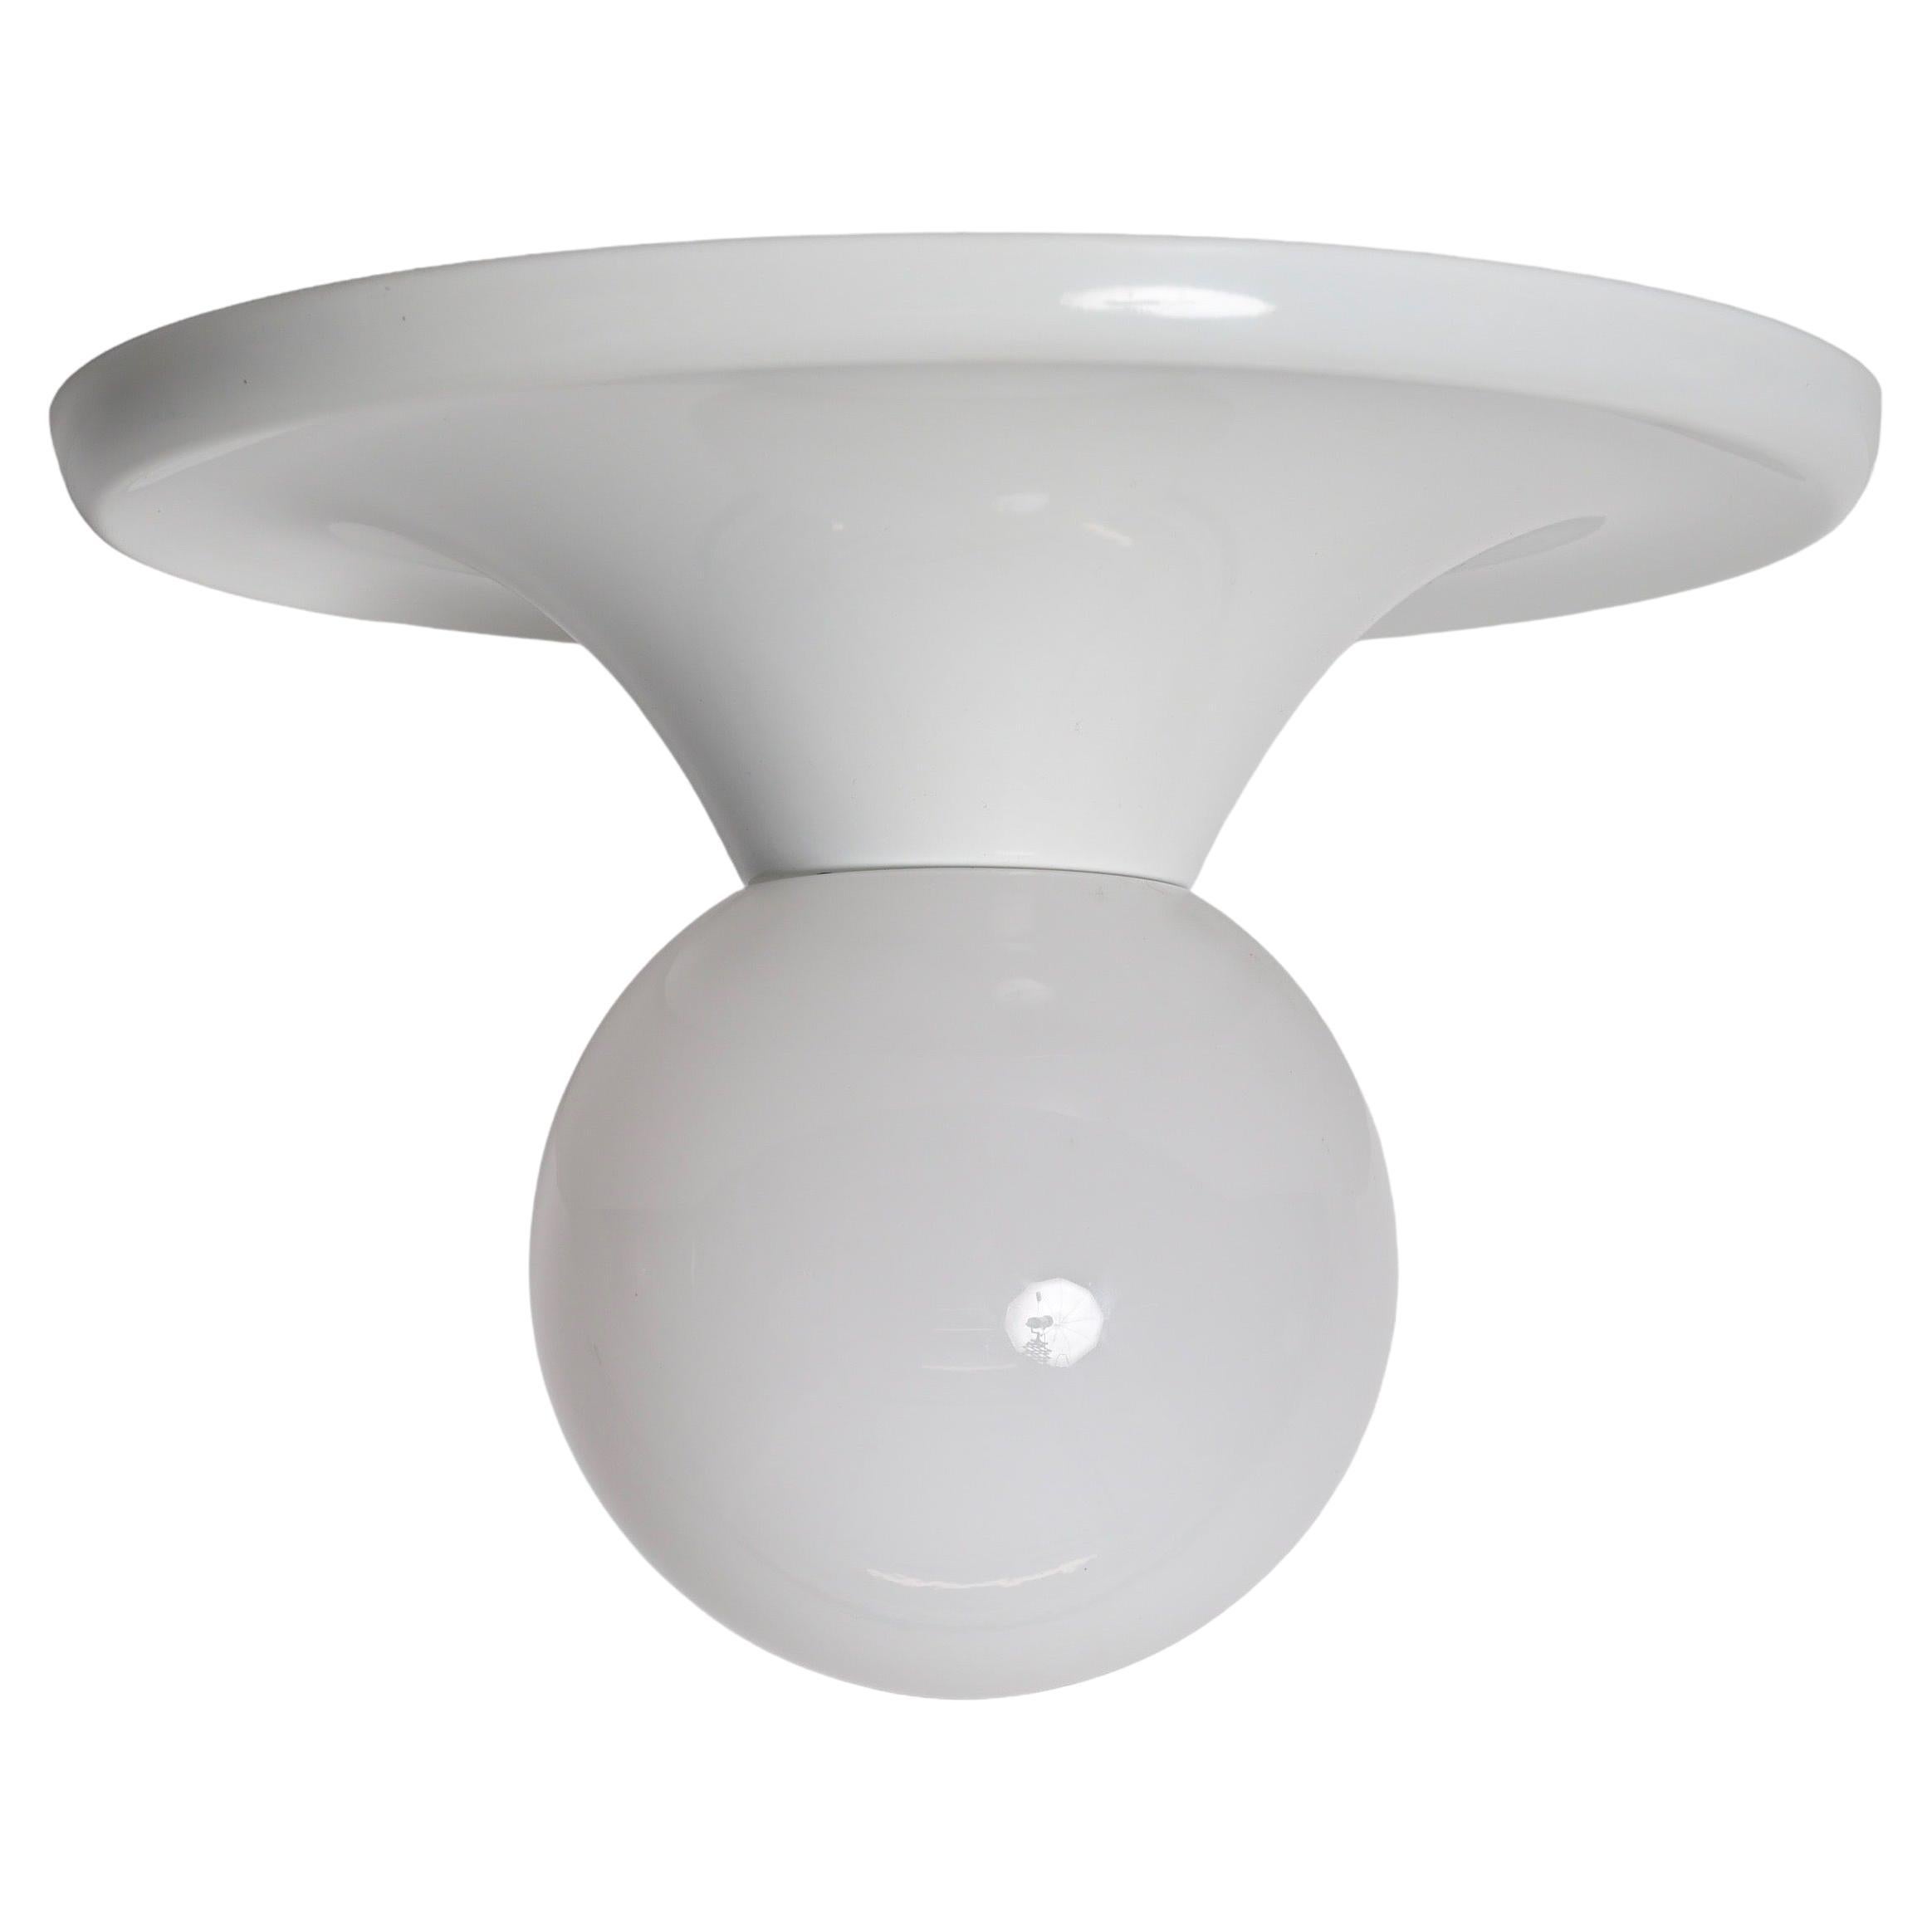 Castiglioni Metal "Light Ball" Italian Sconce for Arteluce and Flos, 1960s For Sale